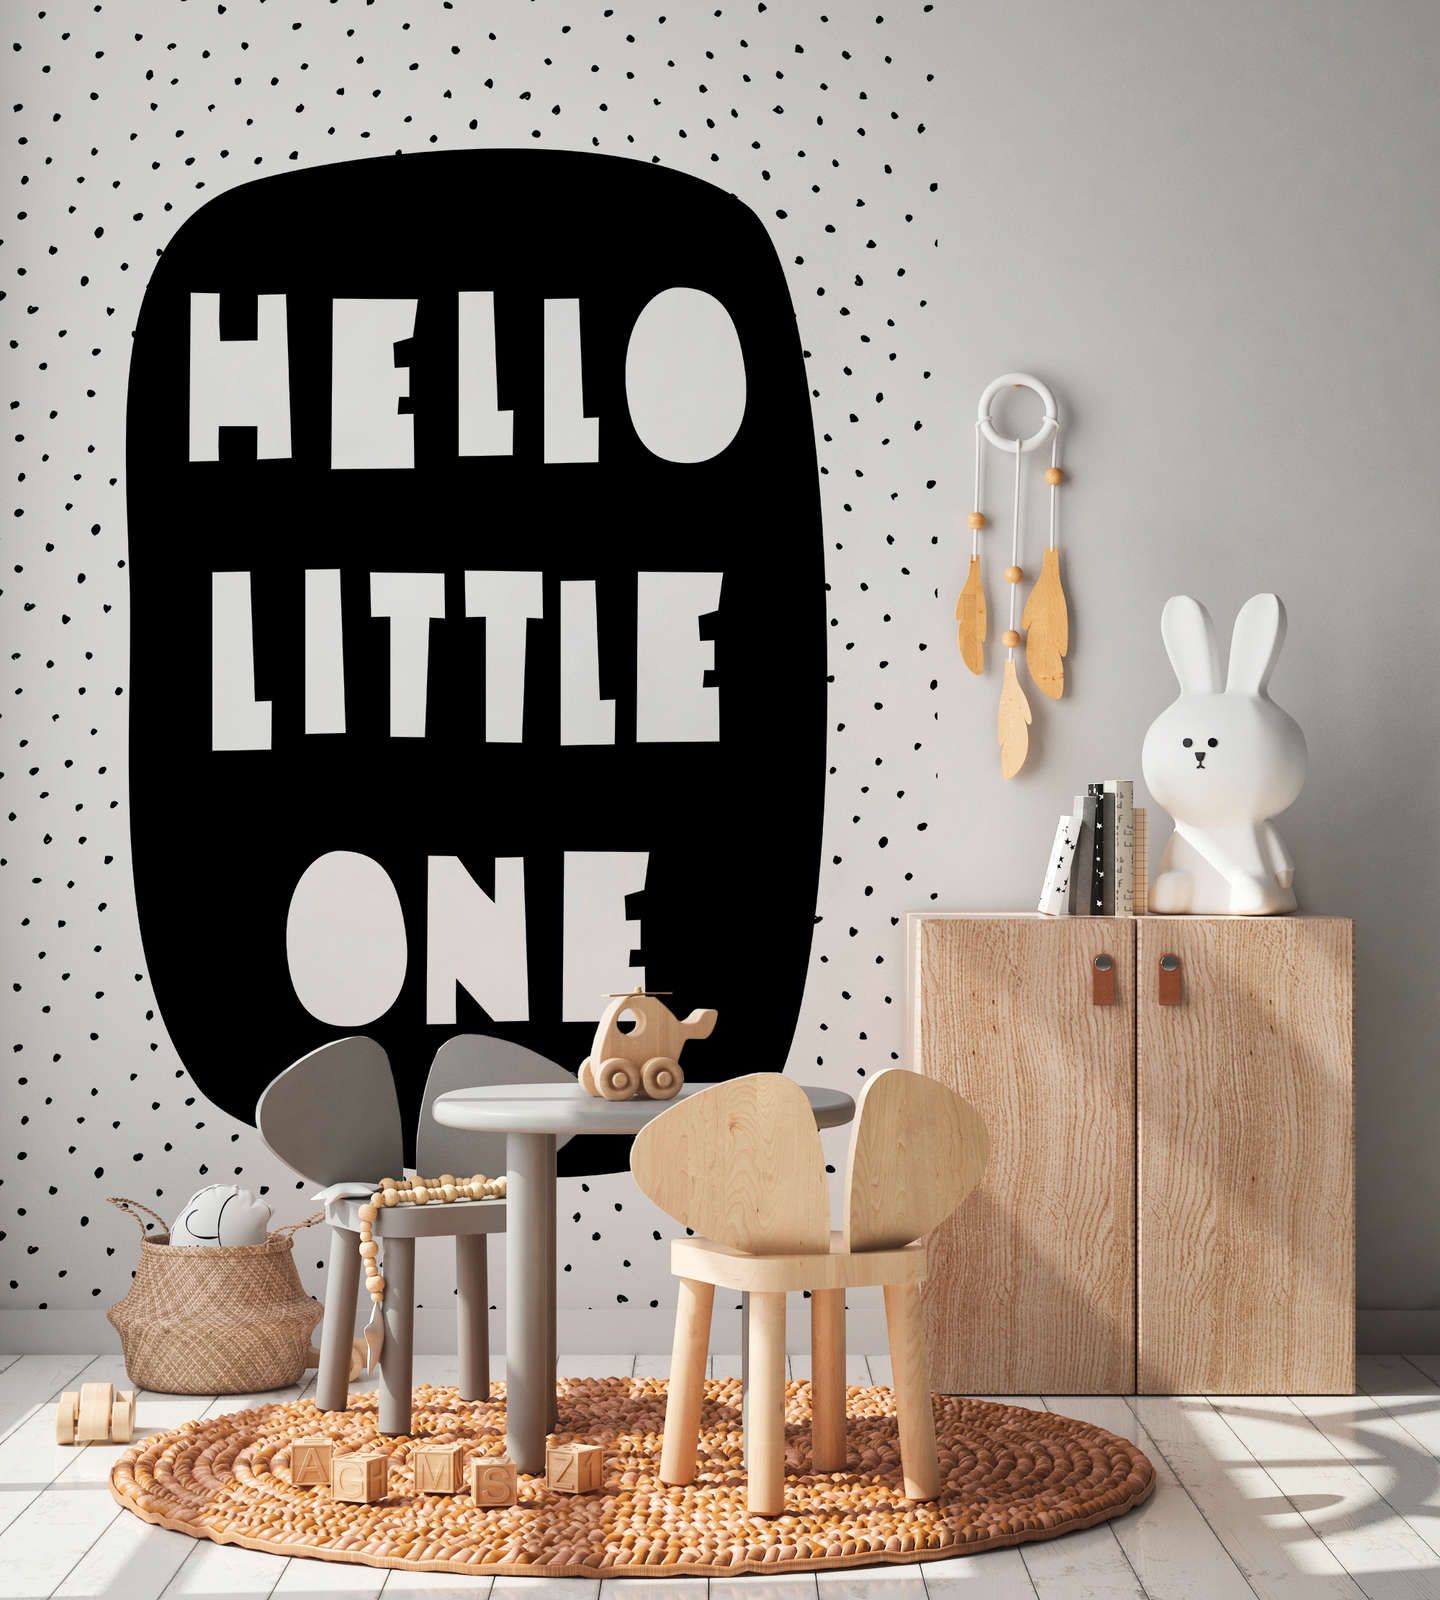             Photo wallpaper for children's room with lettering "Hello Little One" - Smooth & slightly shiny non-woven
        